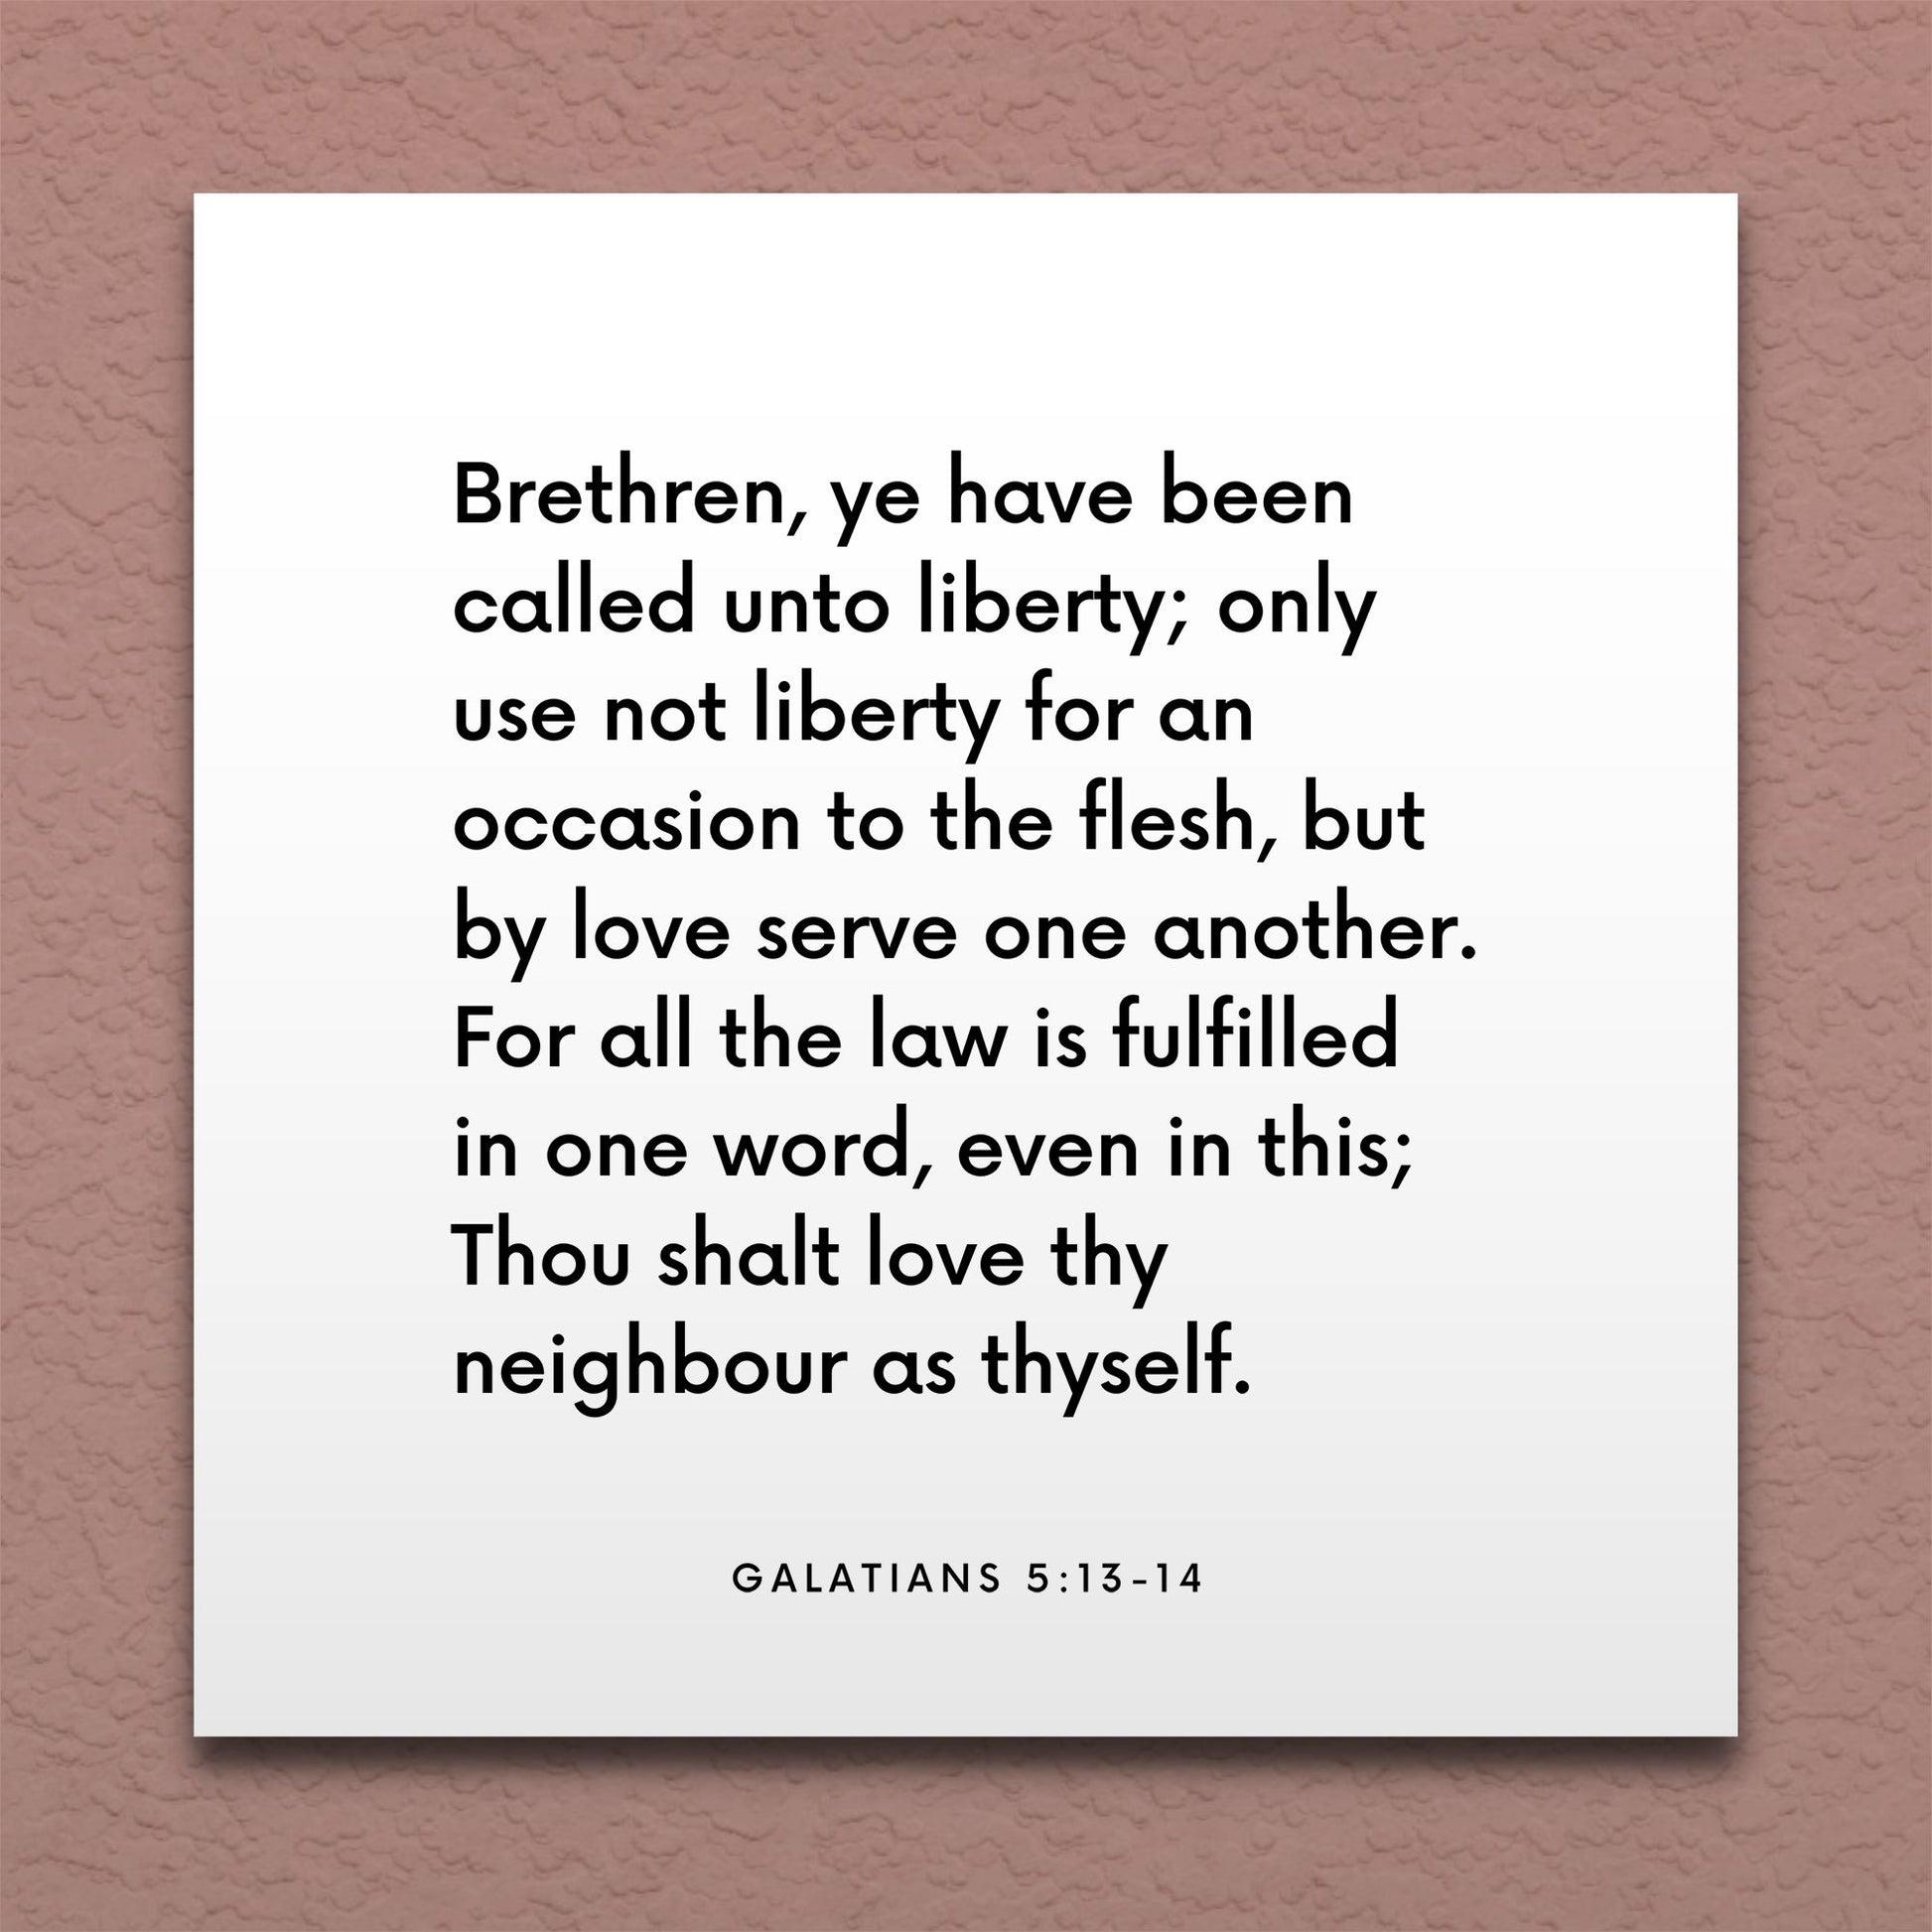 Wall-mounted scripture tile for Galatians 5:13-14 - "Ye have been called unto liberty"